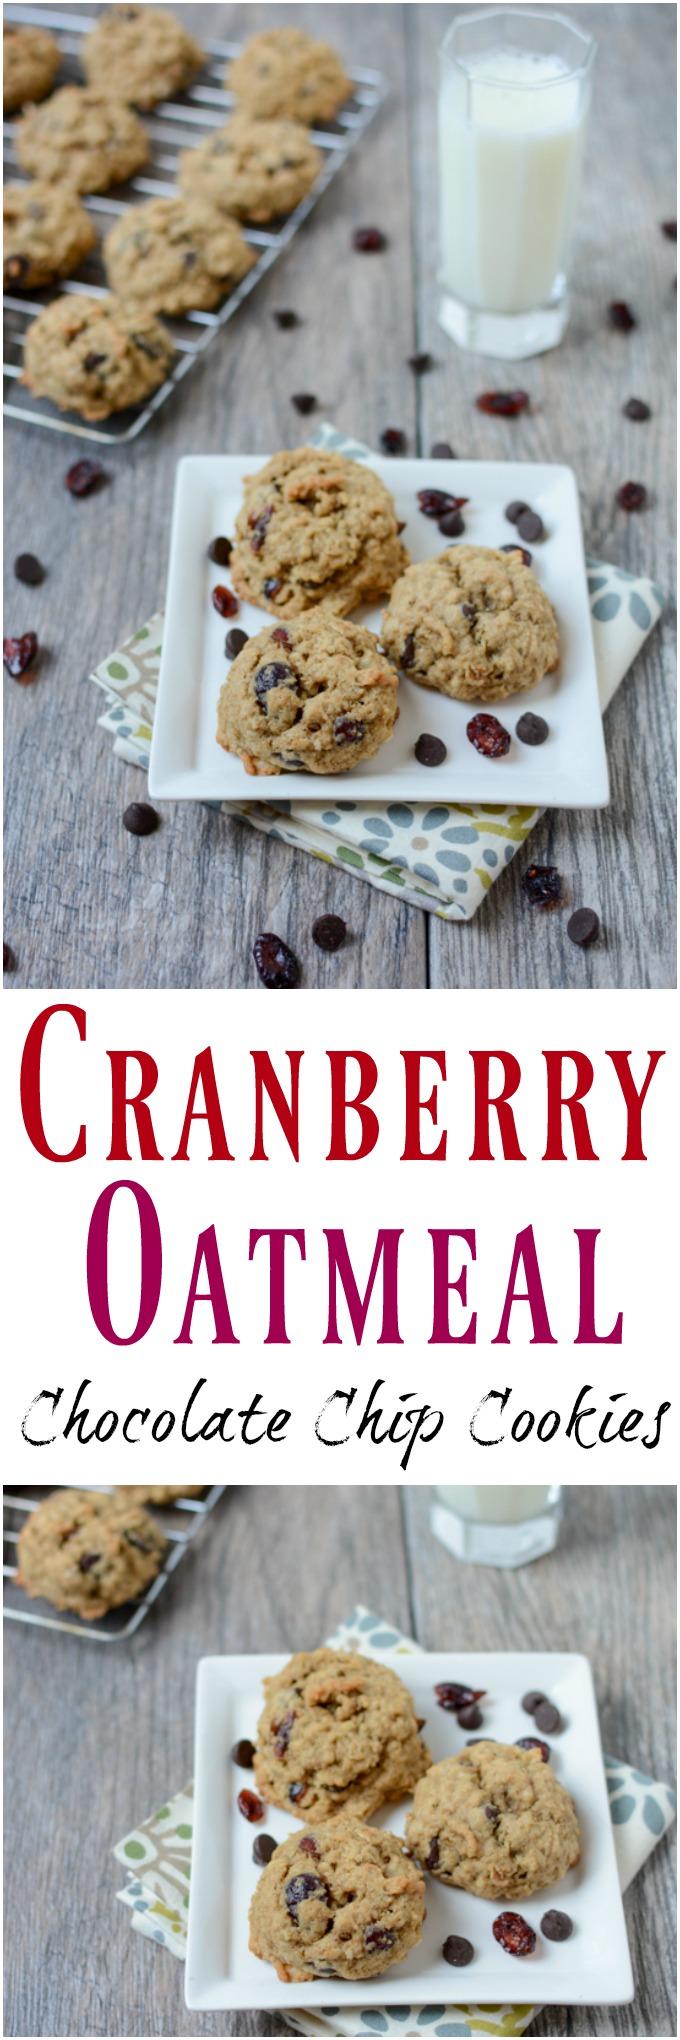 These Cranberry Oatmeal Chocolate Chip Cookies are fluffy, chewy and full of delicious mix-ins. They're easy to make when a dessert craving strikes!